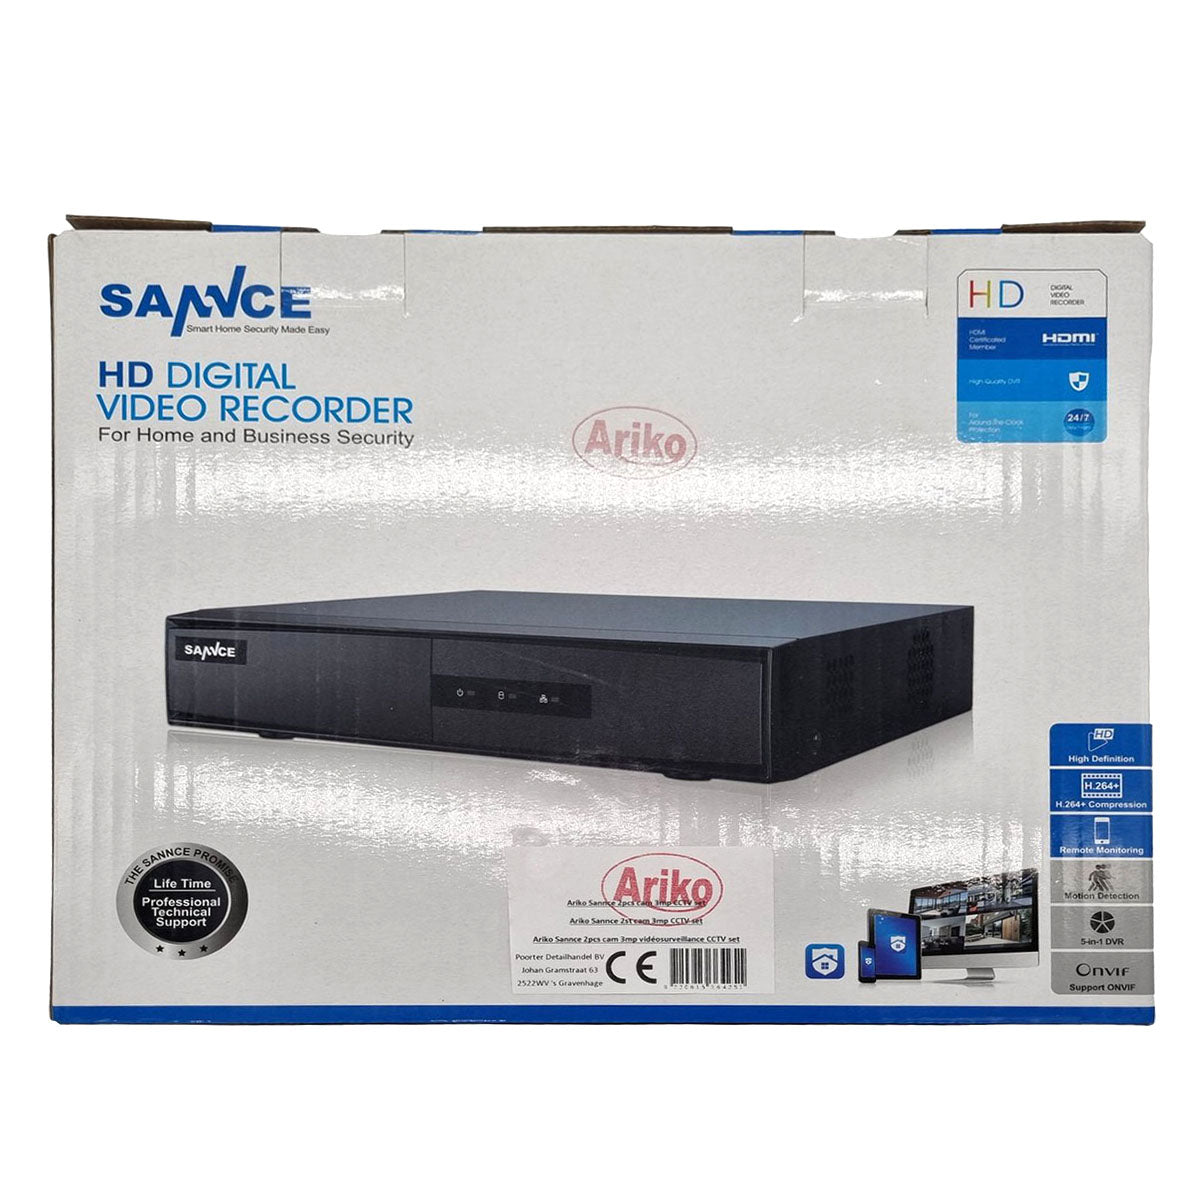 <tc>Ariko</tc> Sannce Camera CCTV system, 2 x Black high quality 3MP security cameras, Night vision 25 mtr, View recorded and live images online, including 1TB hard disk - Dutch helpdesk